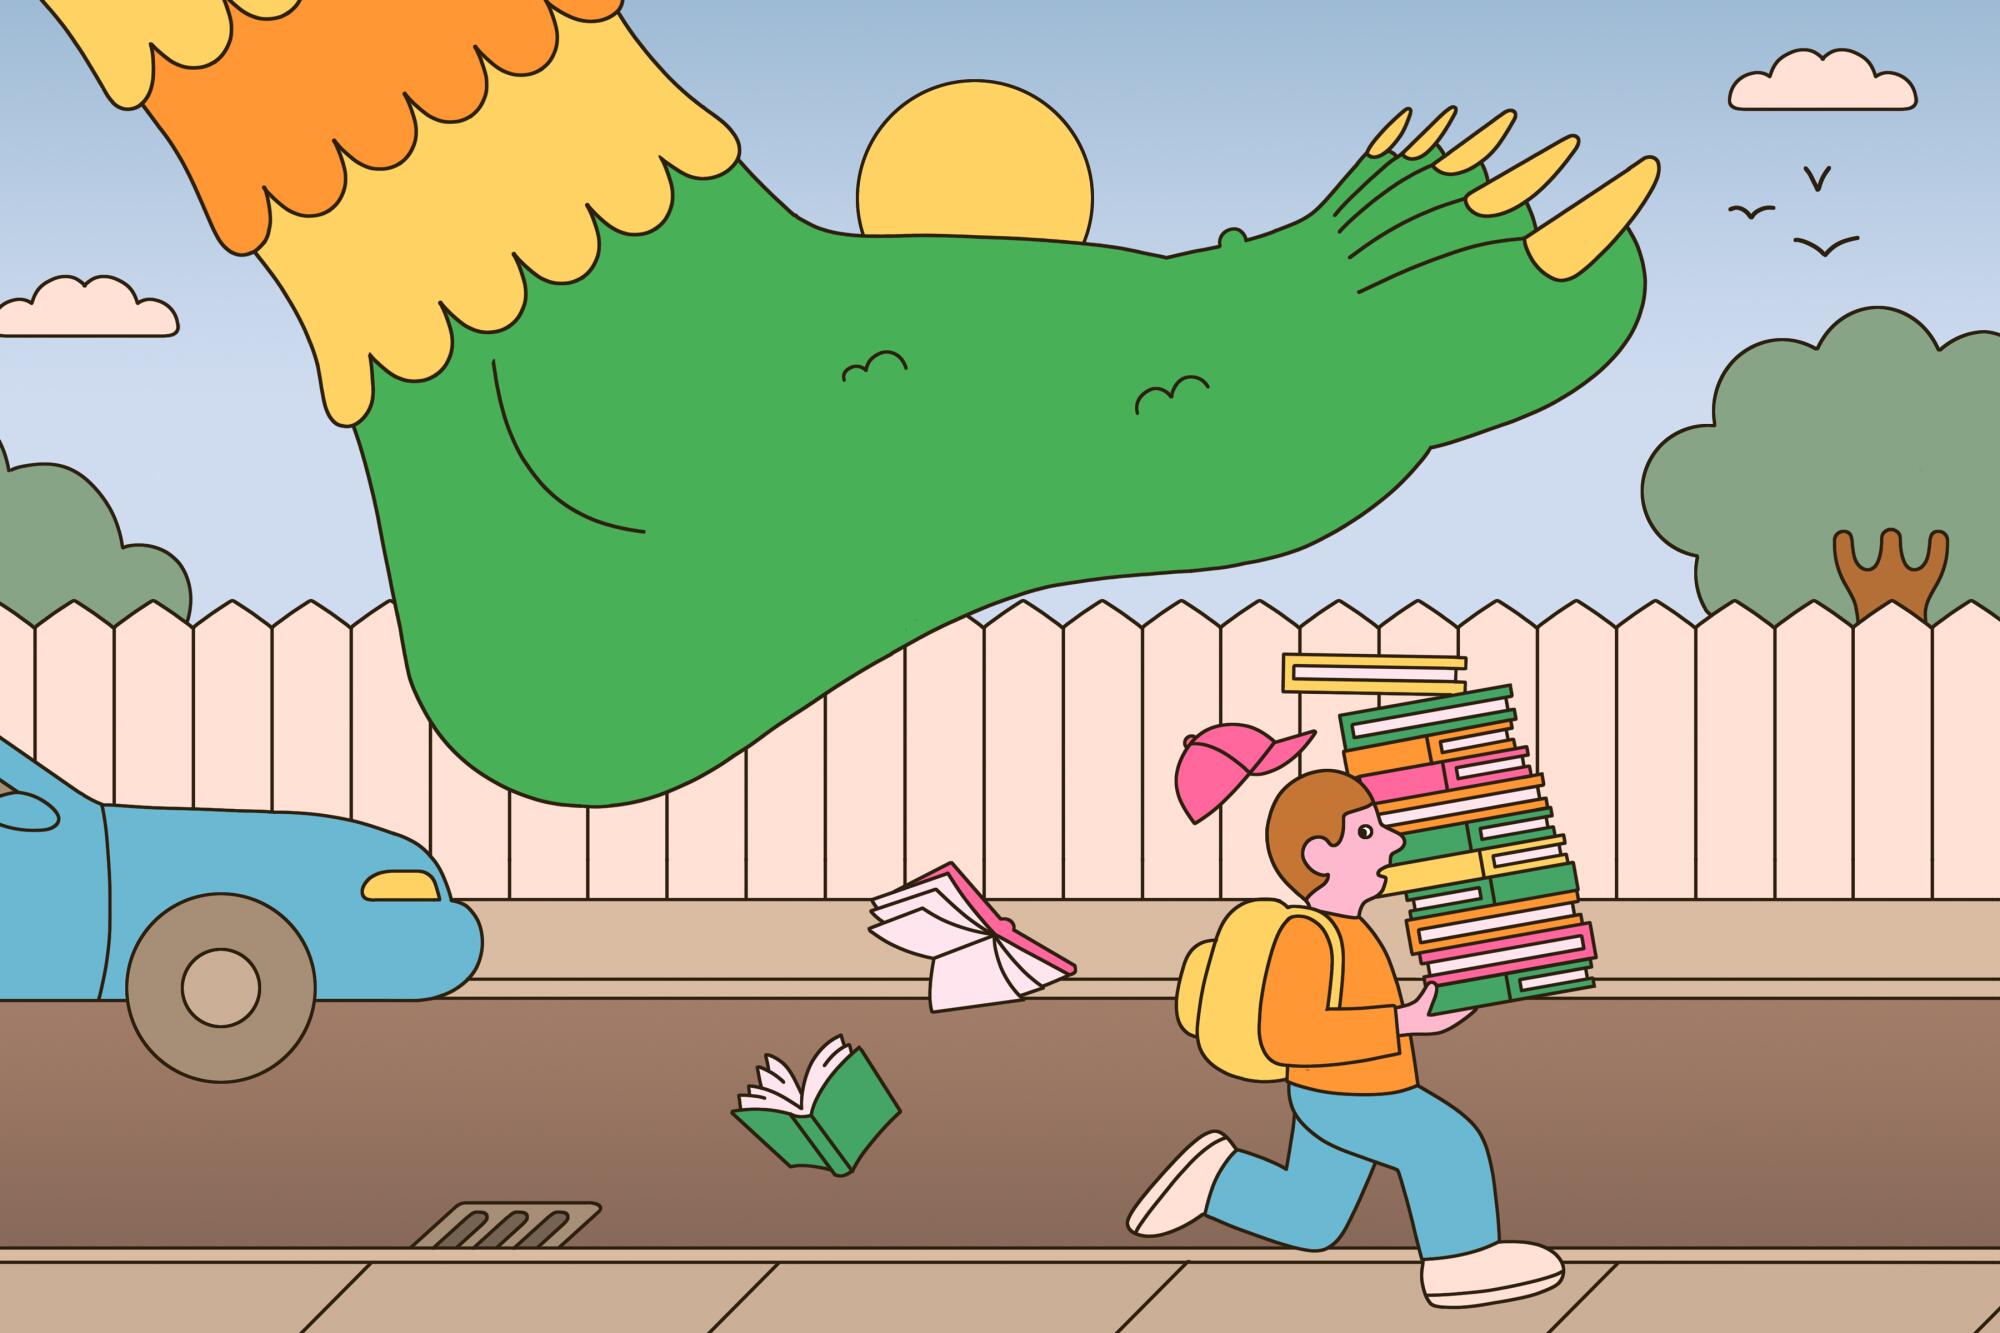 Illustration of a child carrying a stack of books running on the sidewalk away from a giant monster's foot.